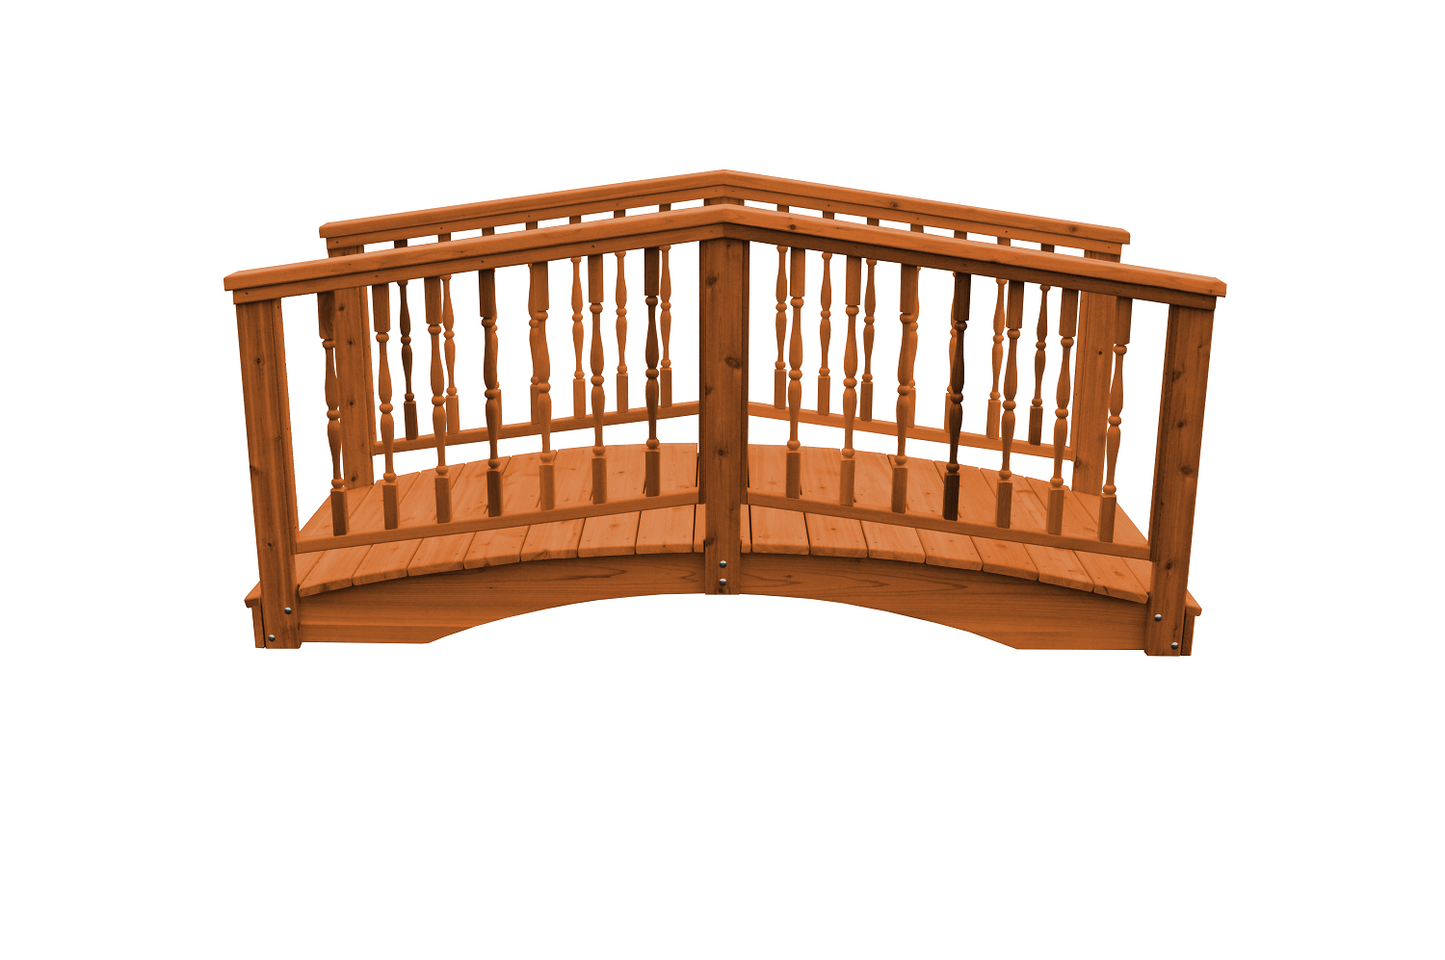 A&L Furniture Co. Western Red Cedar 3' x 8' Spindle Bridge - LEAD TIME TO SHIP 2 WEEKS